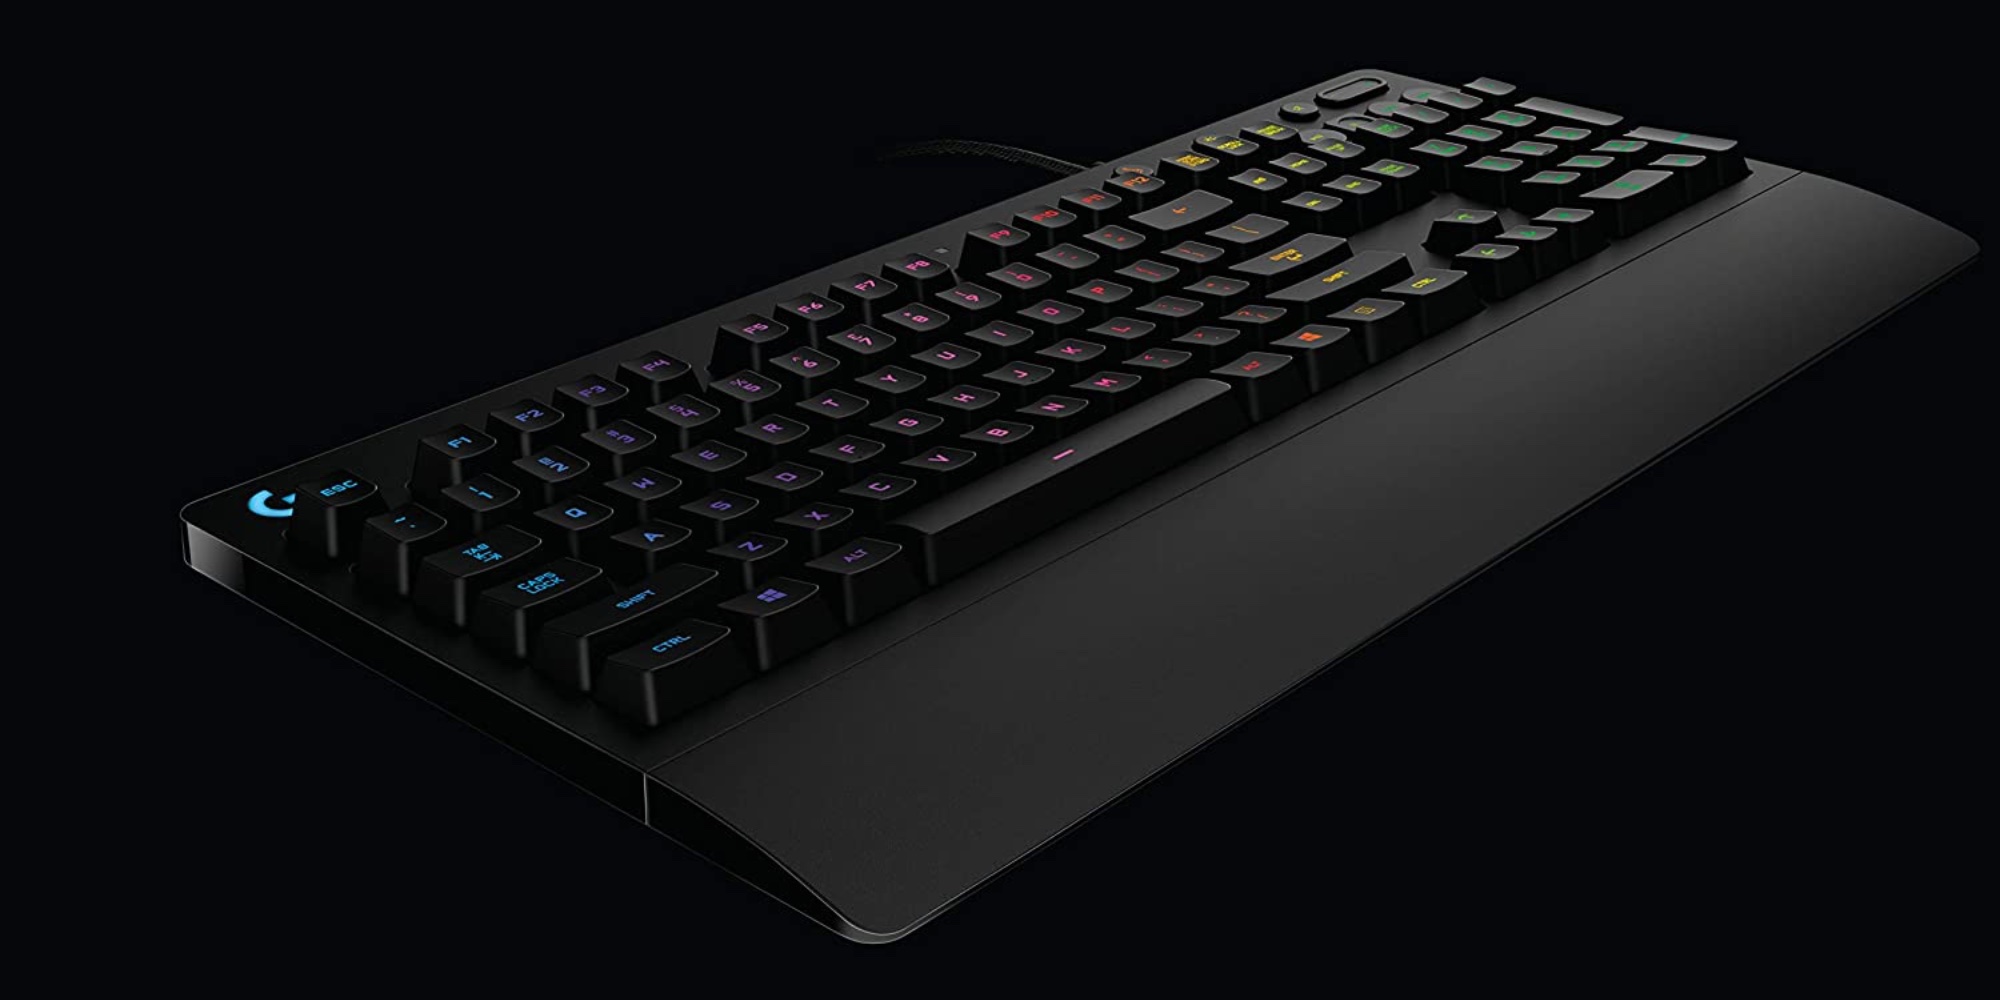  Keyboard Cover for Logitech G213 Prodigy Gaming